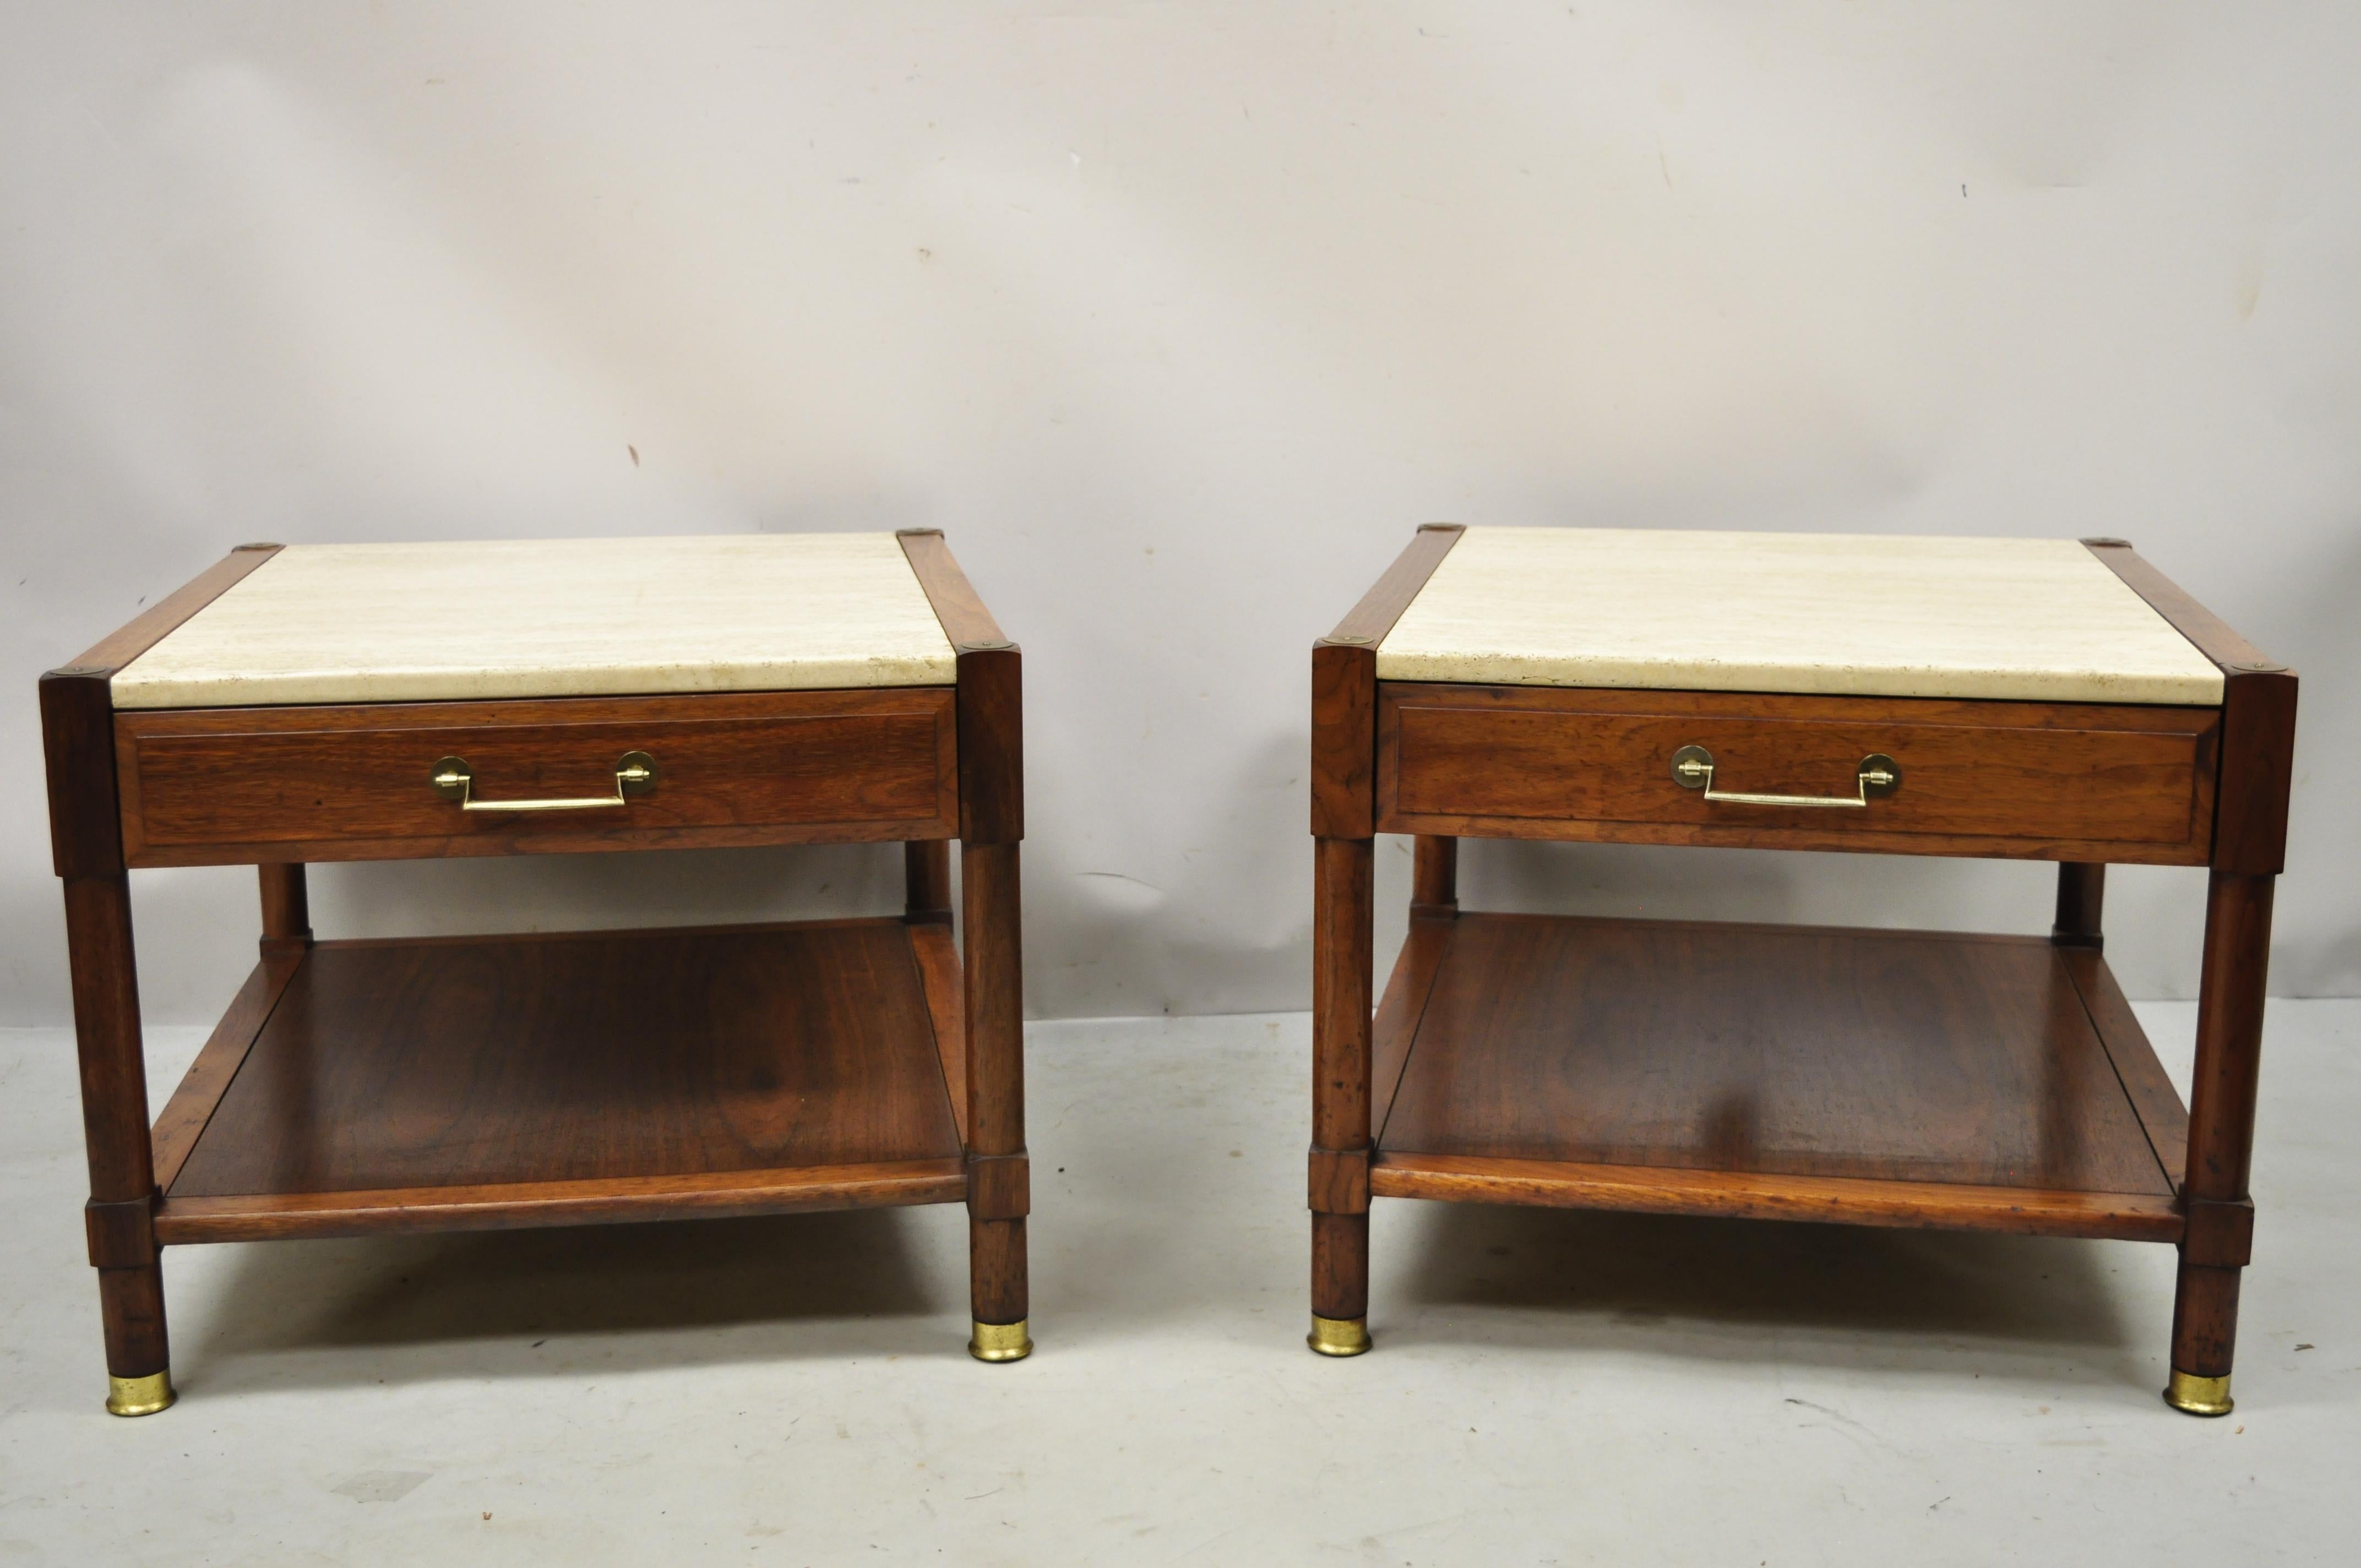 Mid Century Modern travertine stone top walnut 2 tier lamp side end tables - a Pair. Item features travertine stone top, brass capped feet, lower shelf, solid wood construction, beautiful wood grain, 1 dovetailed drawer, very nice vintage pair,